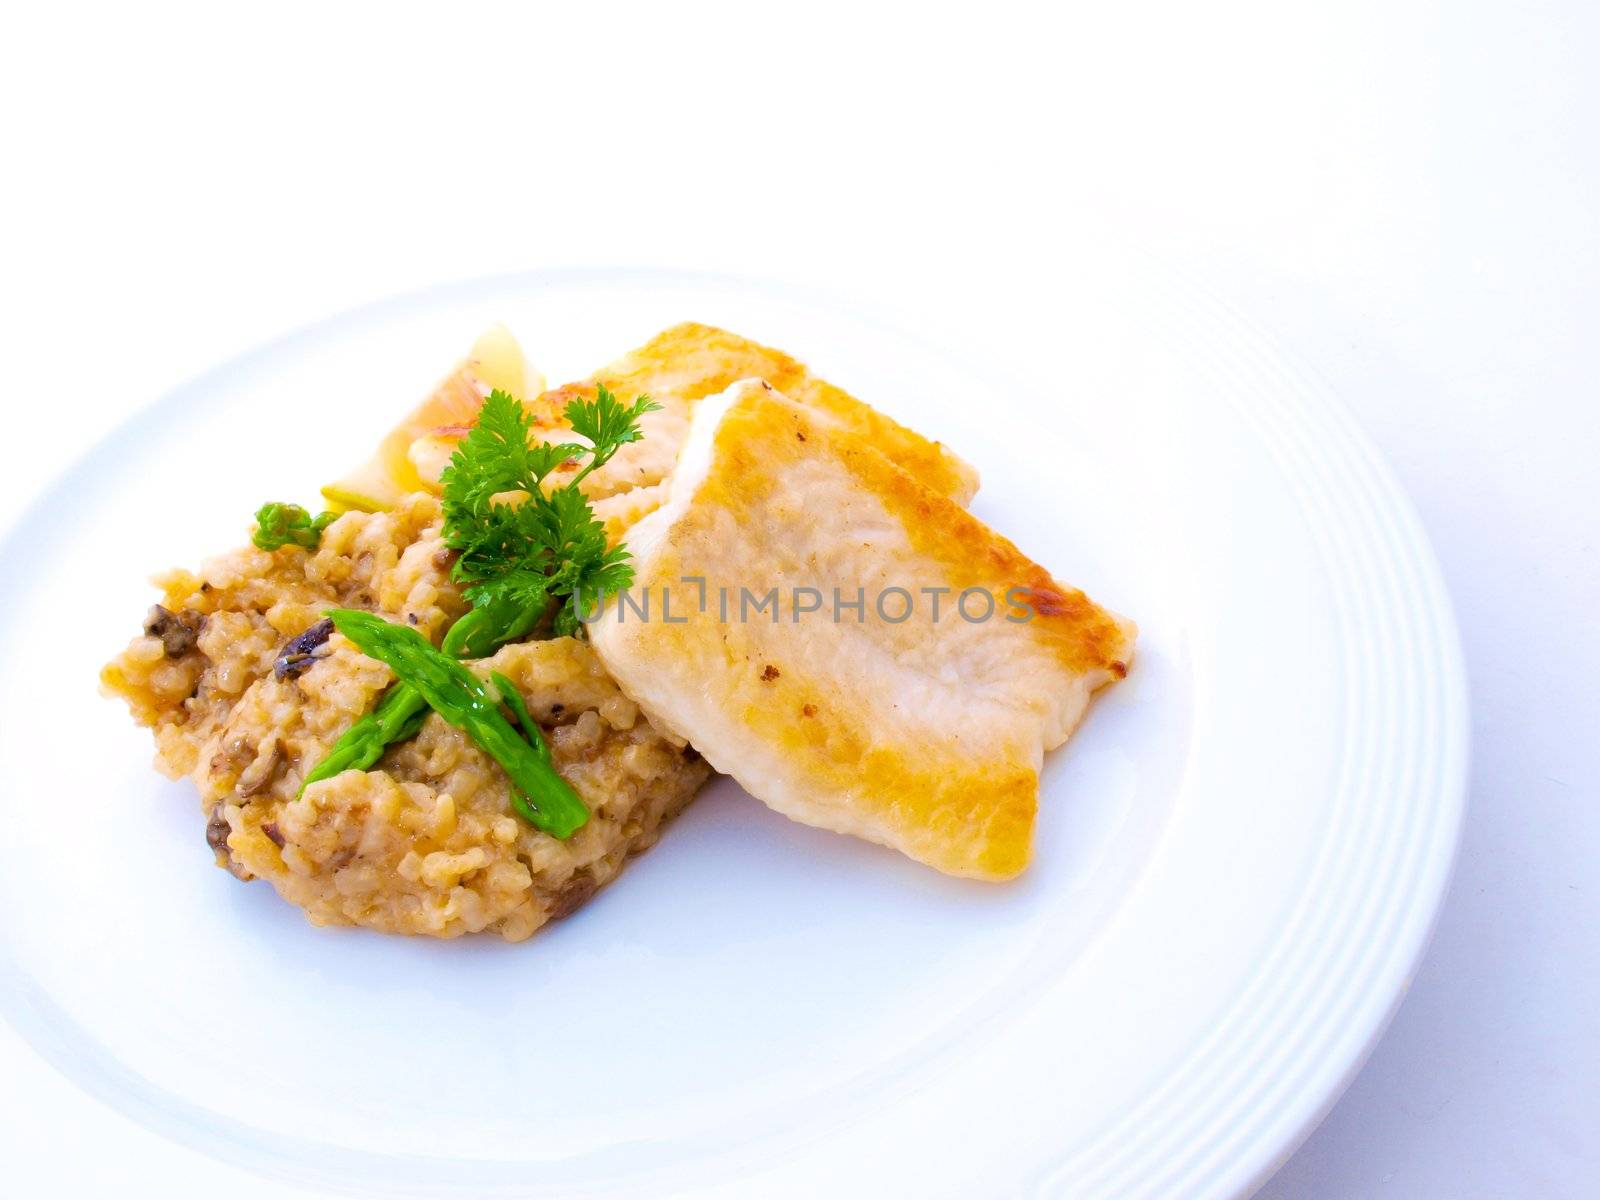  Fish fillet with rice on white background